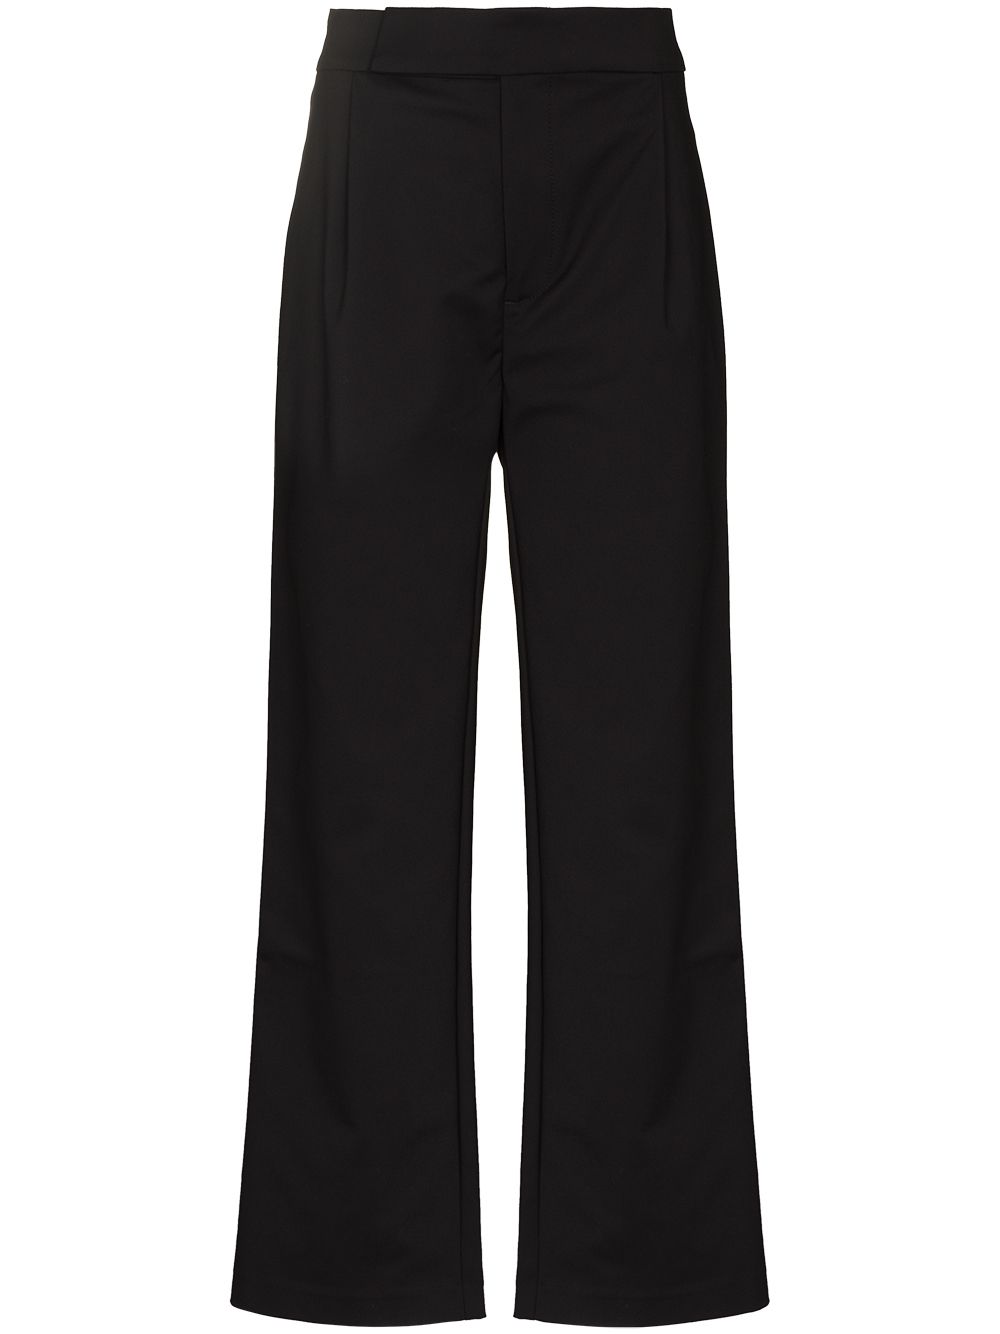 SIR. Marco wide-leg tailored trousers